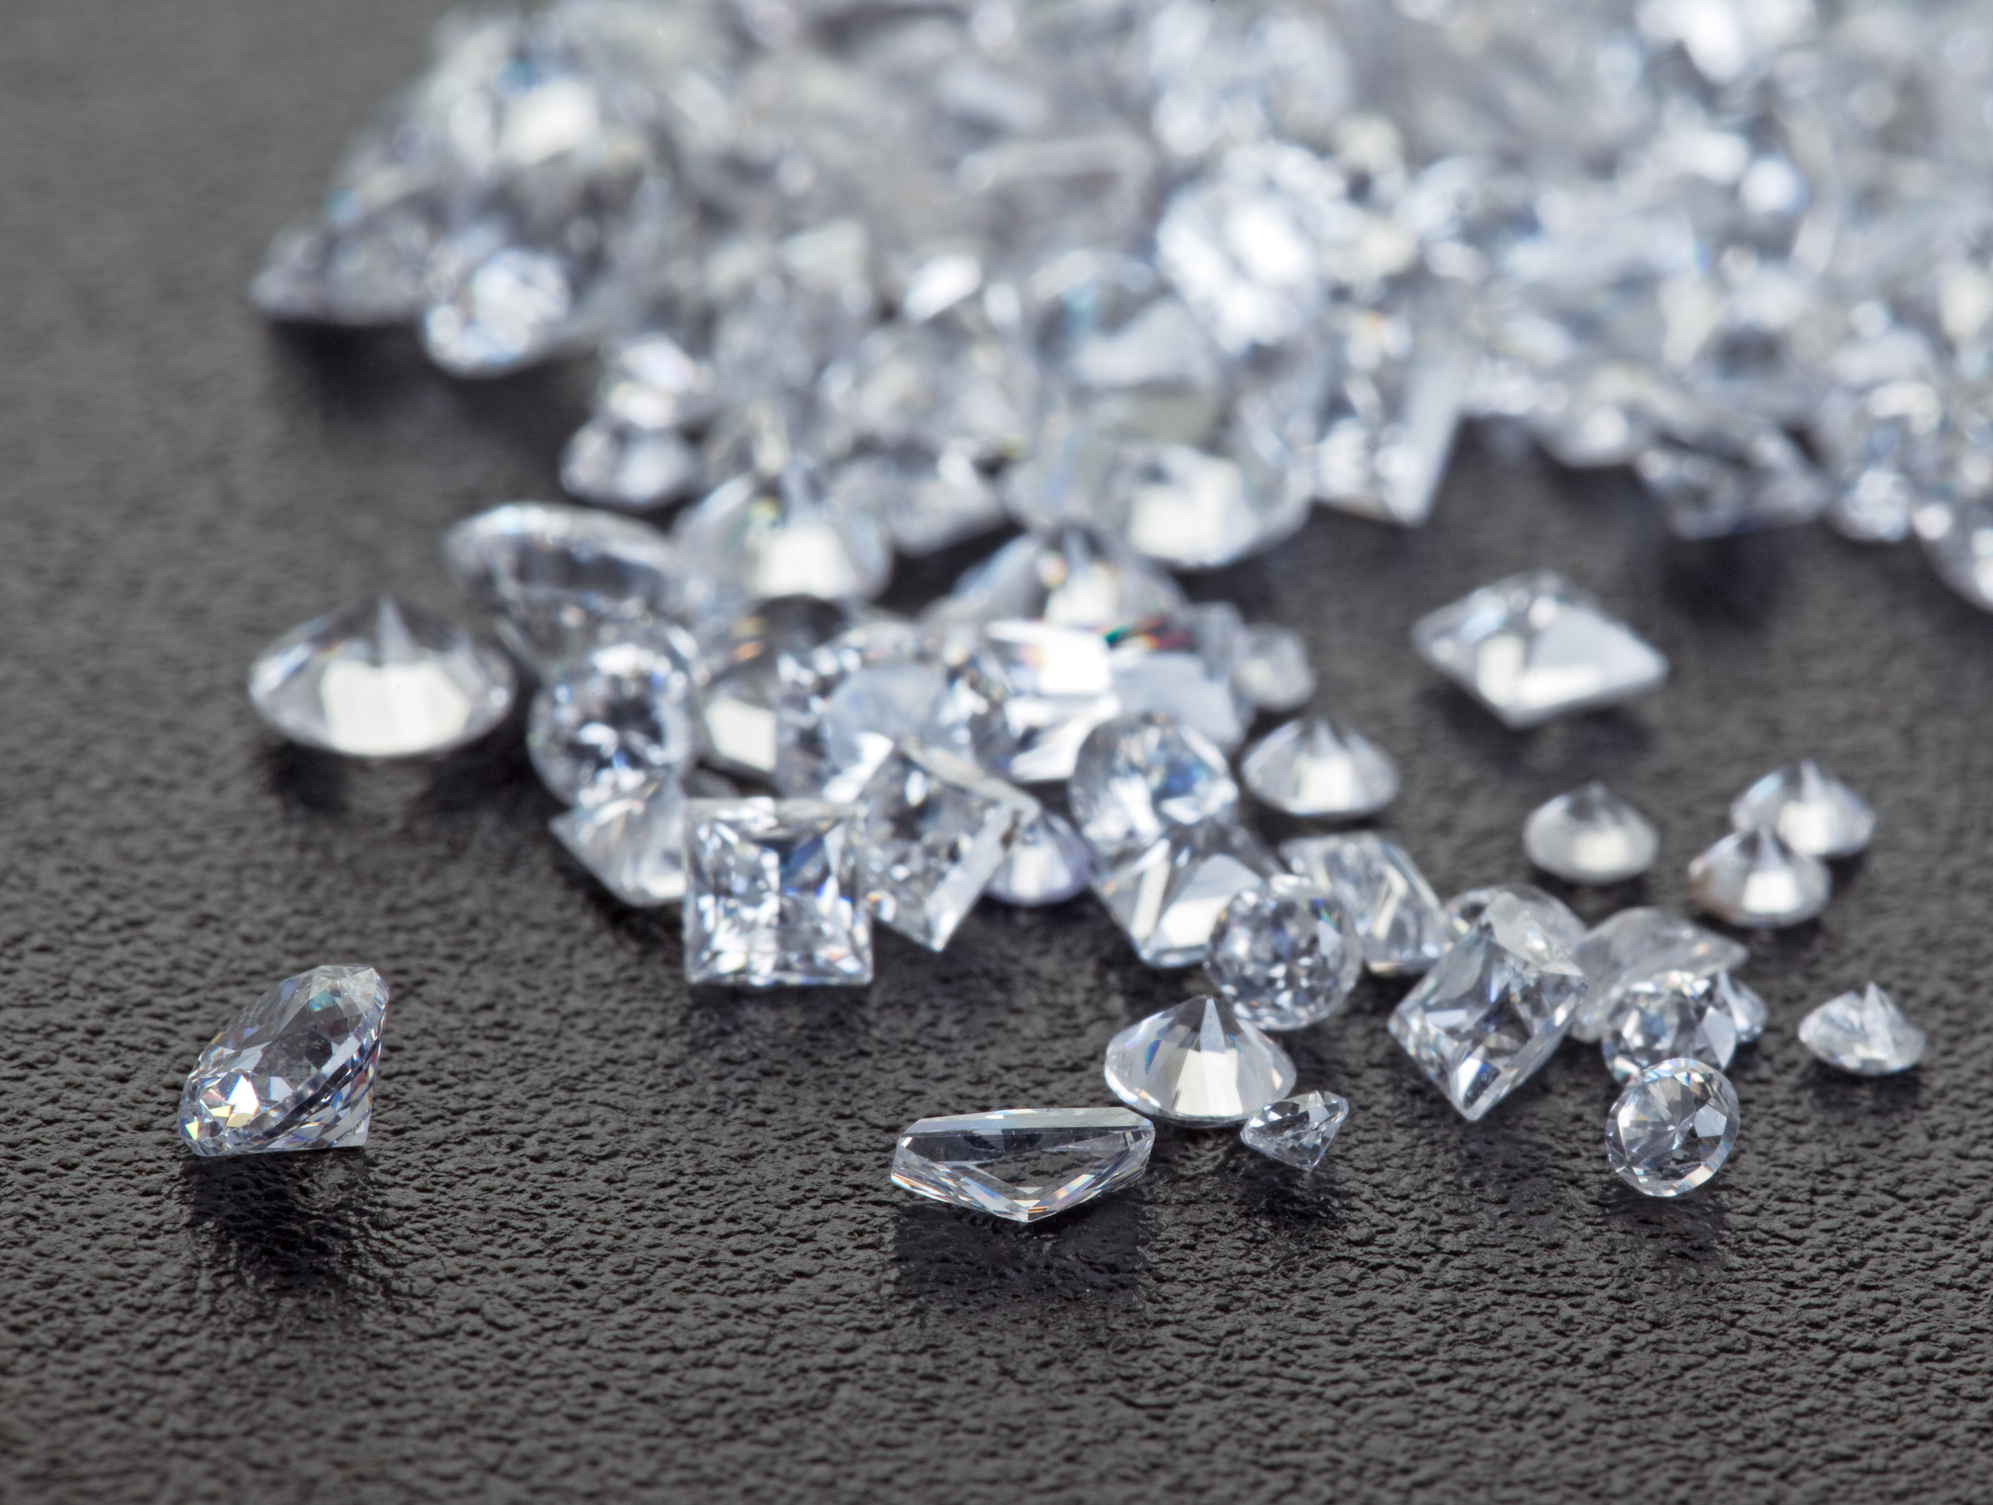 Can You Sell Your Loose Diamonds and Other Gems to a Pawn Shop? The Answer Might Surprise You - USA Pawn